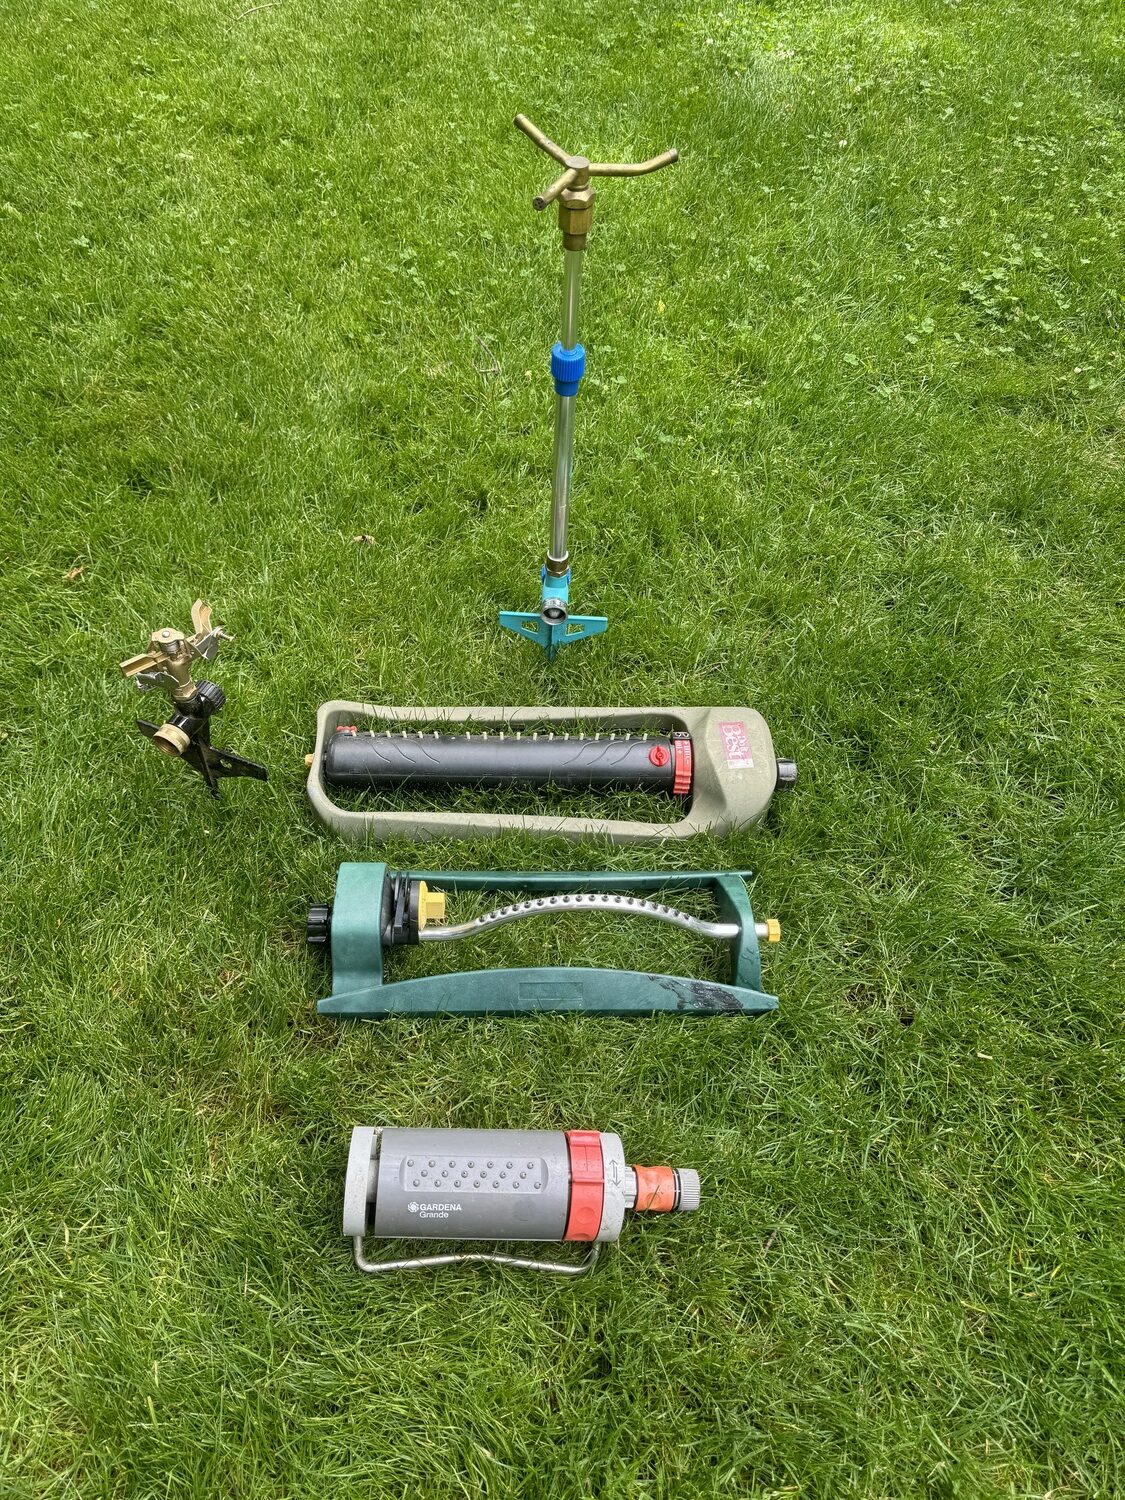 At the top is a spinning sprinkler that can be used in a garden with shorter plants or a small lawn area. The diameter of the area watered is controlled by adjusting the water flow at the hose bib. Below are three types of oscillator sprinklers. Note the yellow end of the oscillator bar on the right. Unscrewing this end cap reveals a clean-out tool for the orifices. All three are adjustable to manage the rectangle watered, and more expensive ones allow right and left adjustments. On the left is a ground-spike impact sprinkler. Good for seedling beds or lawns.  ANDREW MESSINGER